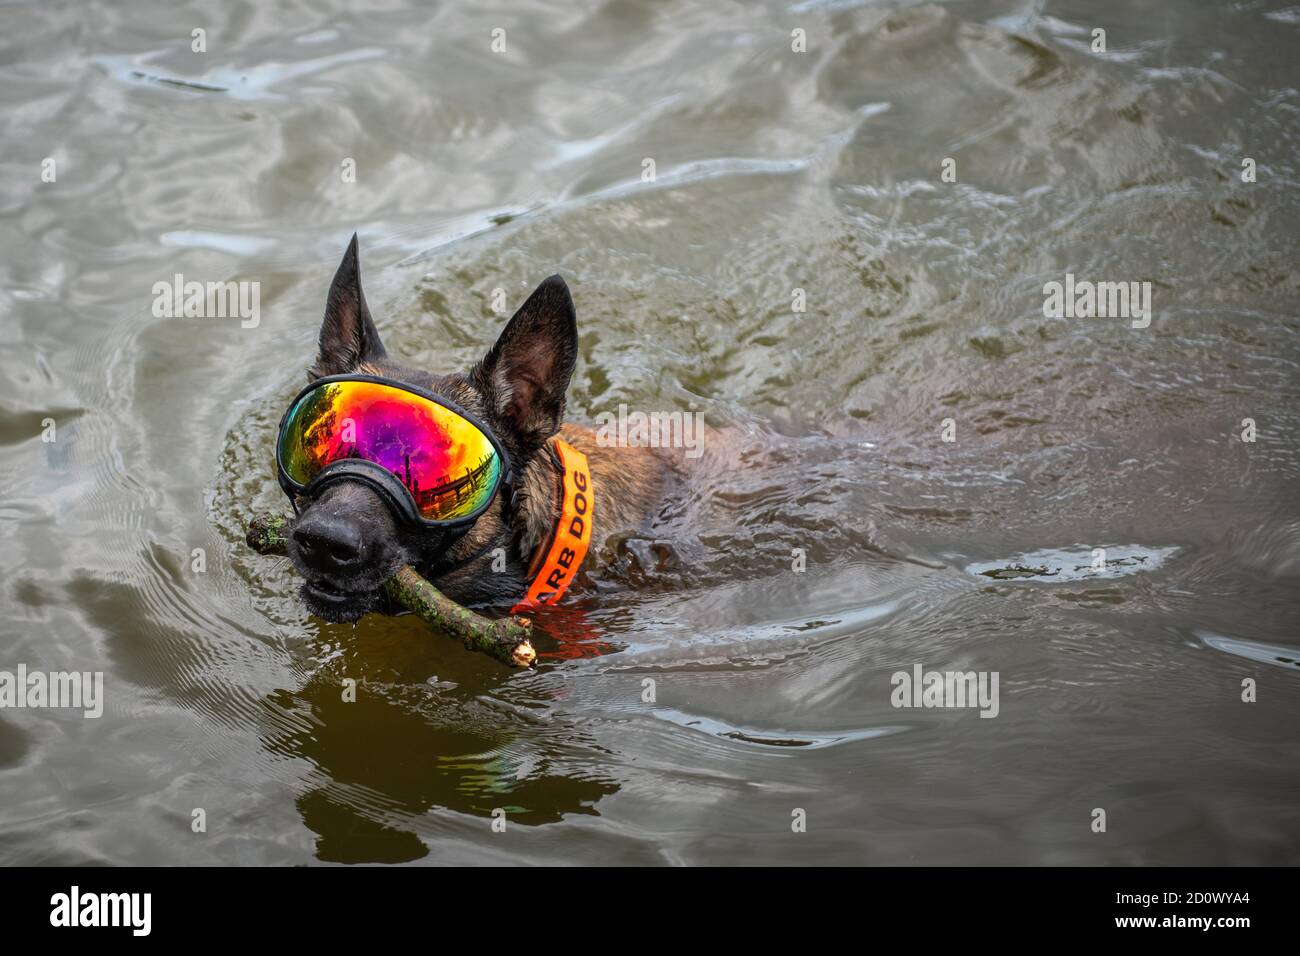 Dog wearing goggles swims in water Aberdeen, Maryland Stock Photo